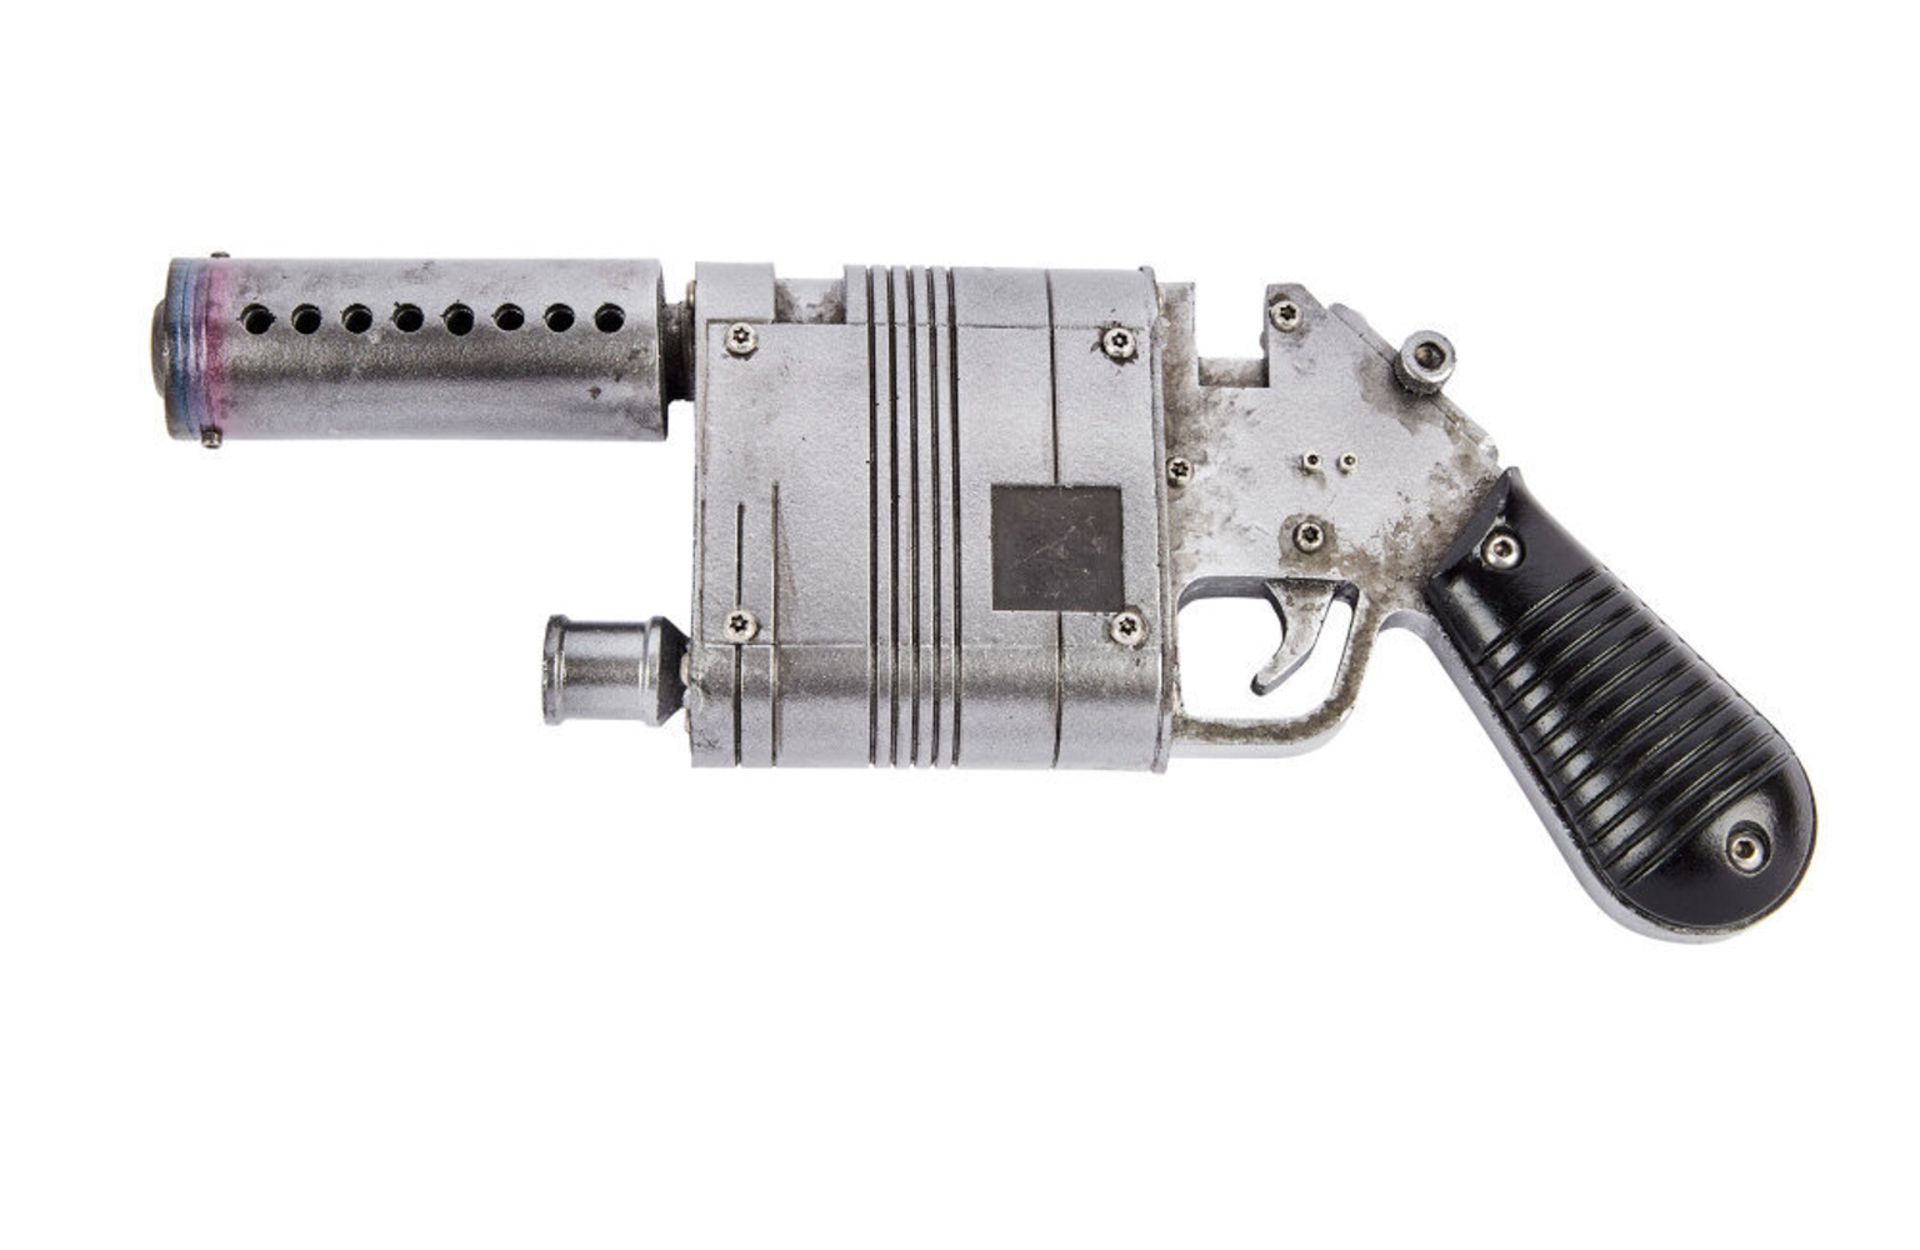 STAR WARS - THE FORCE AWAKENS | DAISY RIDLEY "REY" NN-14 BLASTER PROP (WITH DVD)